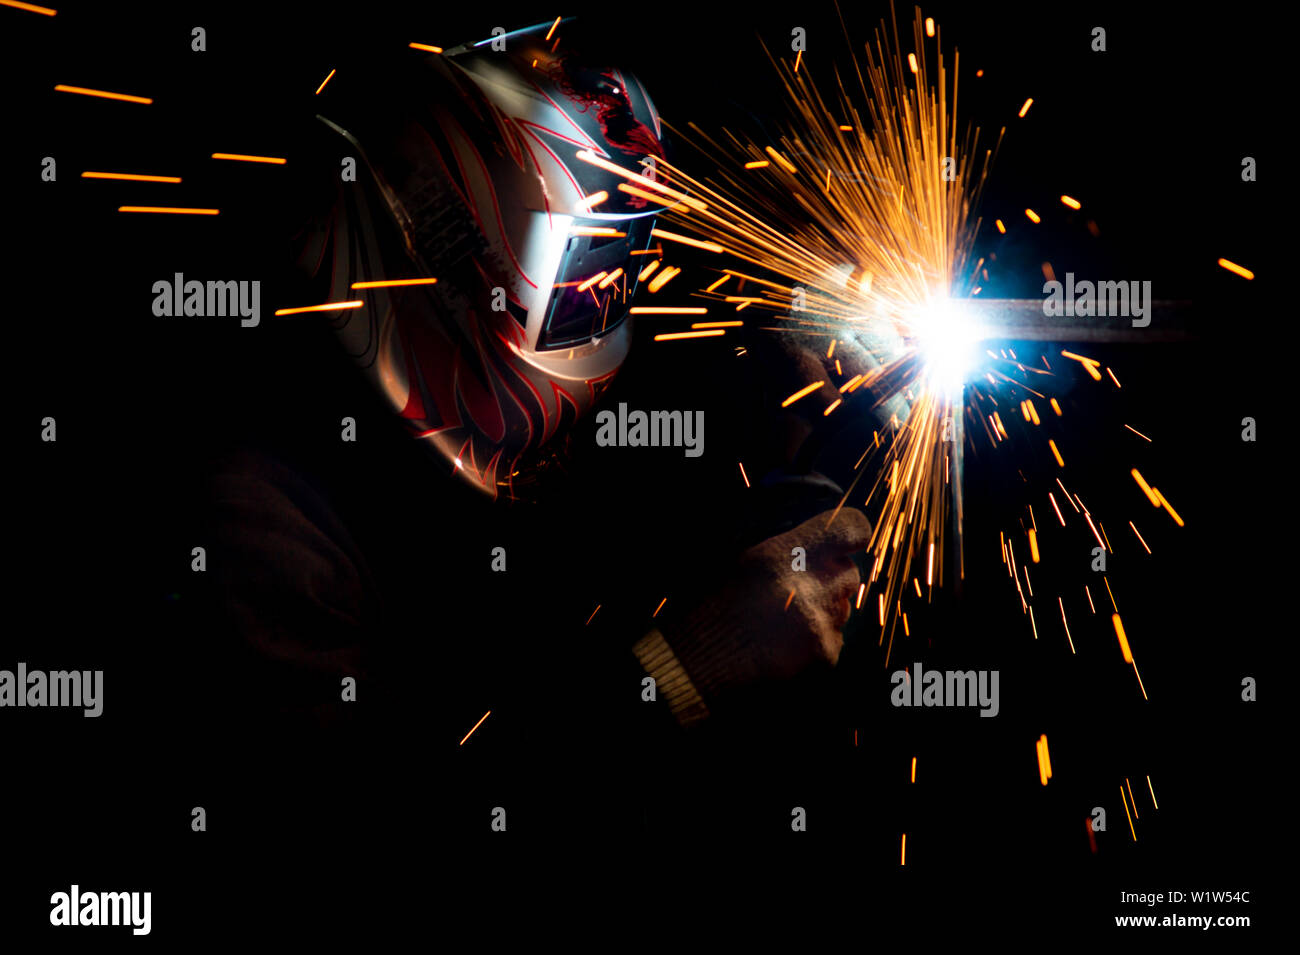 male welder in a mask performing metal welding. photo in dark colors. sparks flying. Stock Photo